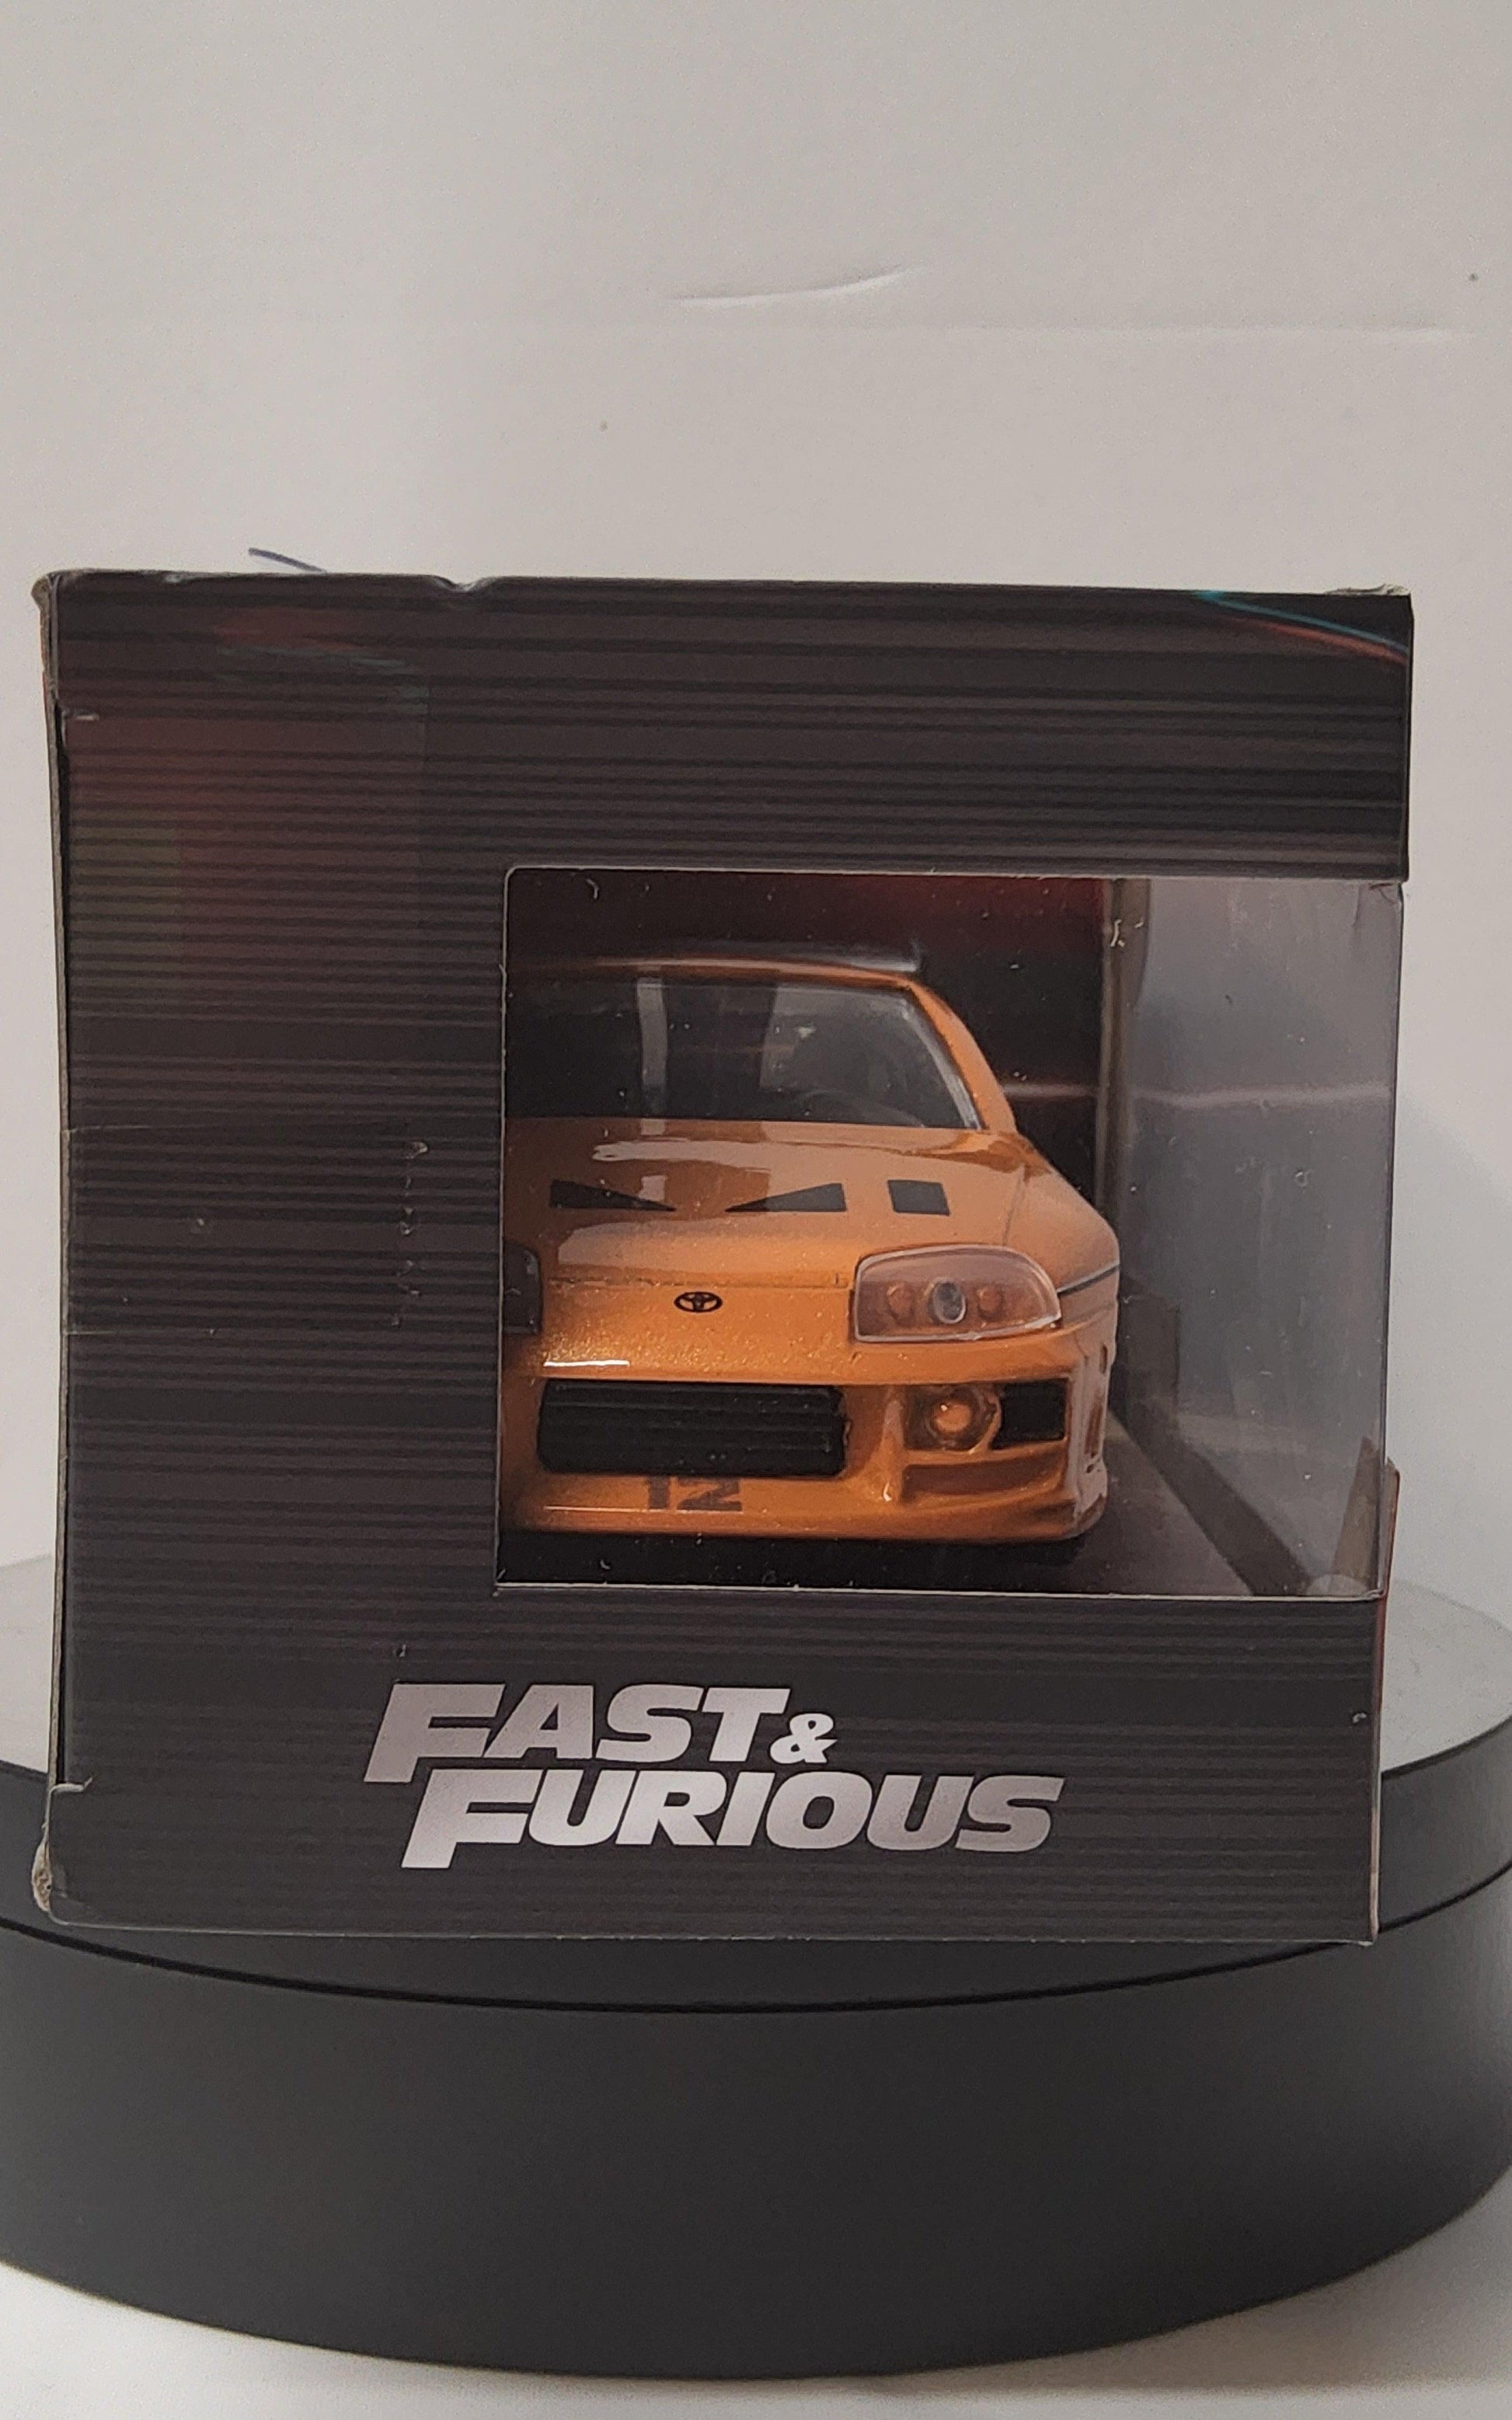 Jada Toys Fast & Furious Movie 1 Brian's Toyota Supra diecast collectible  toy vehicle car, orange with decals, 1:24 scale